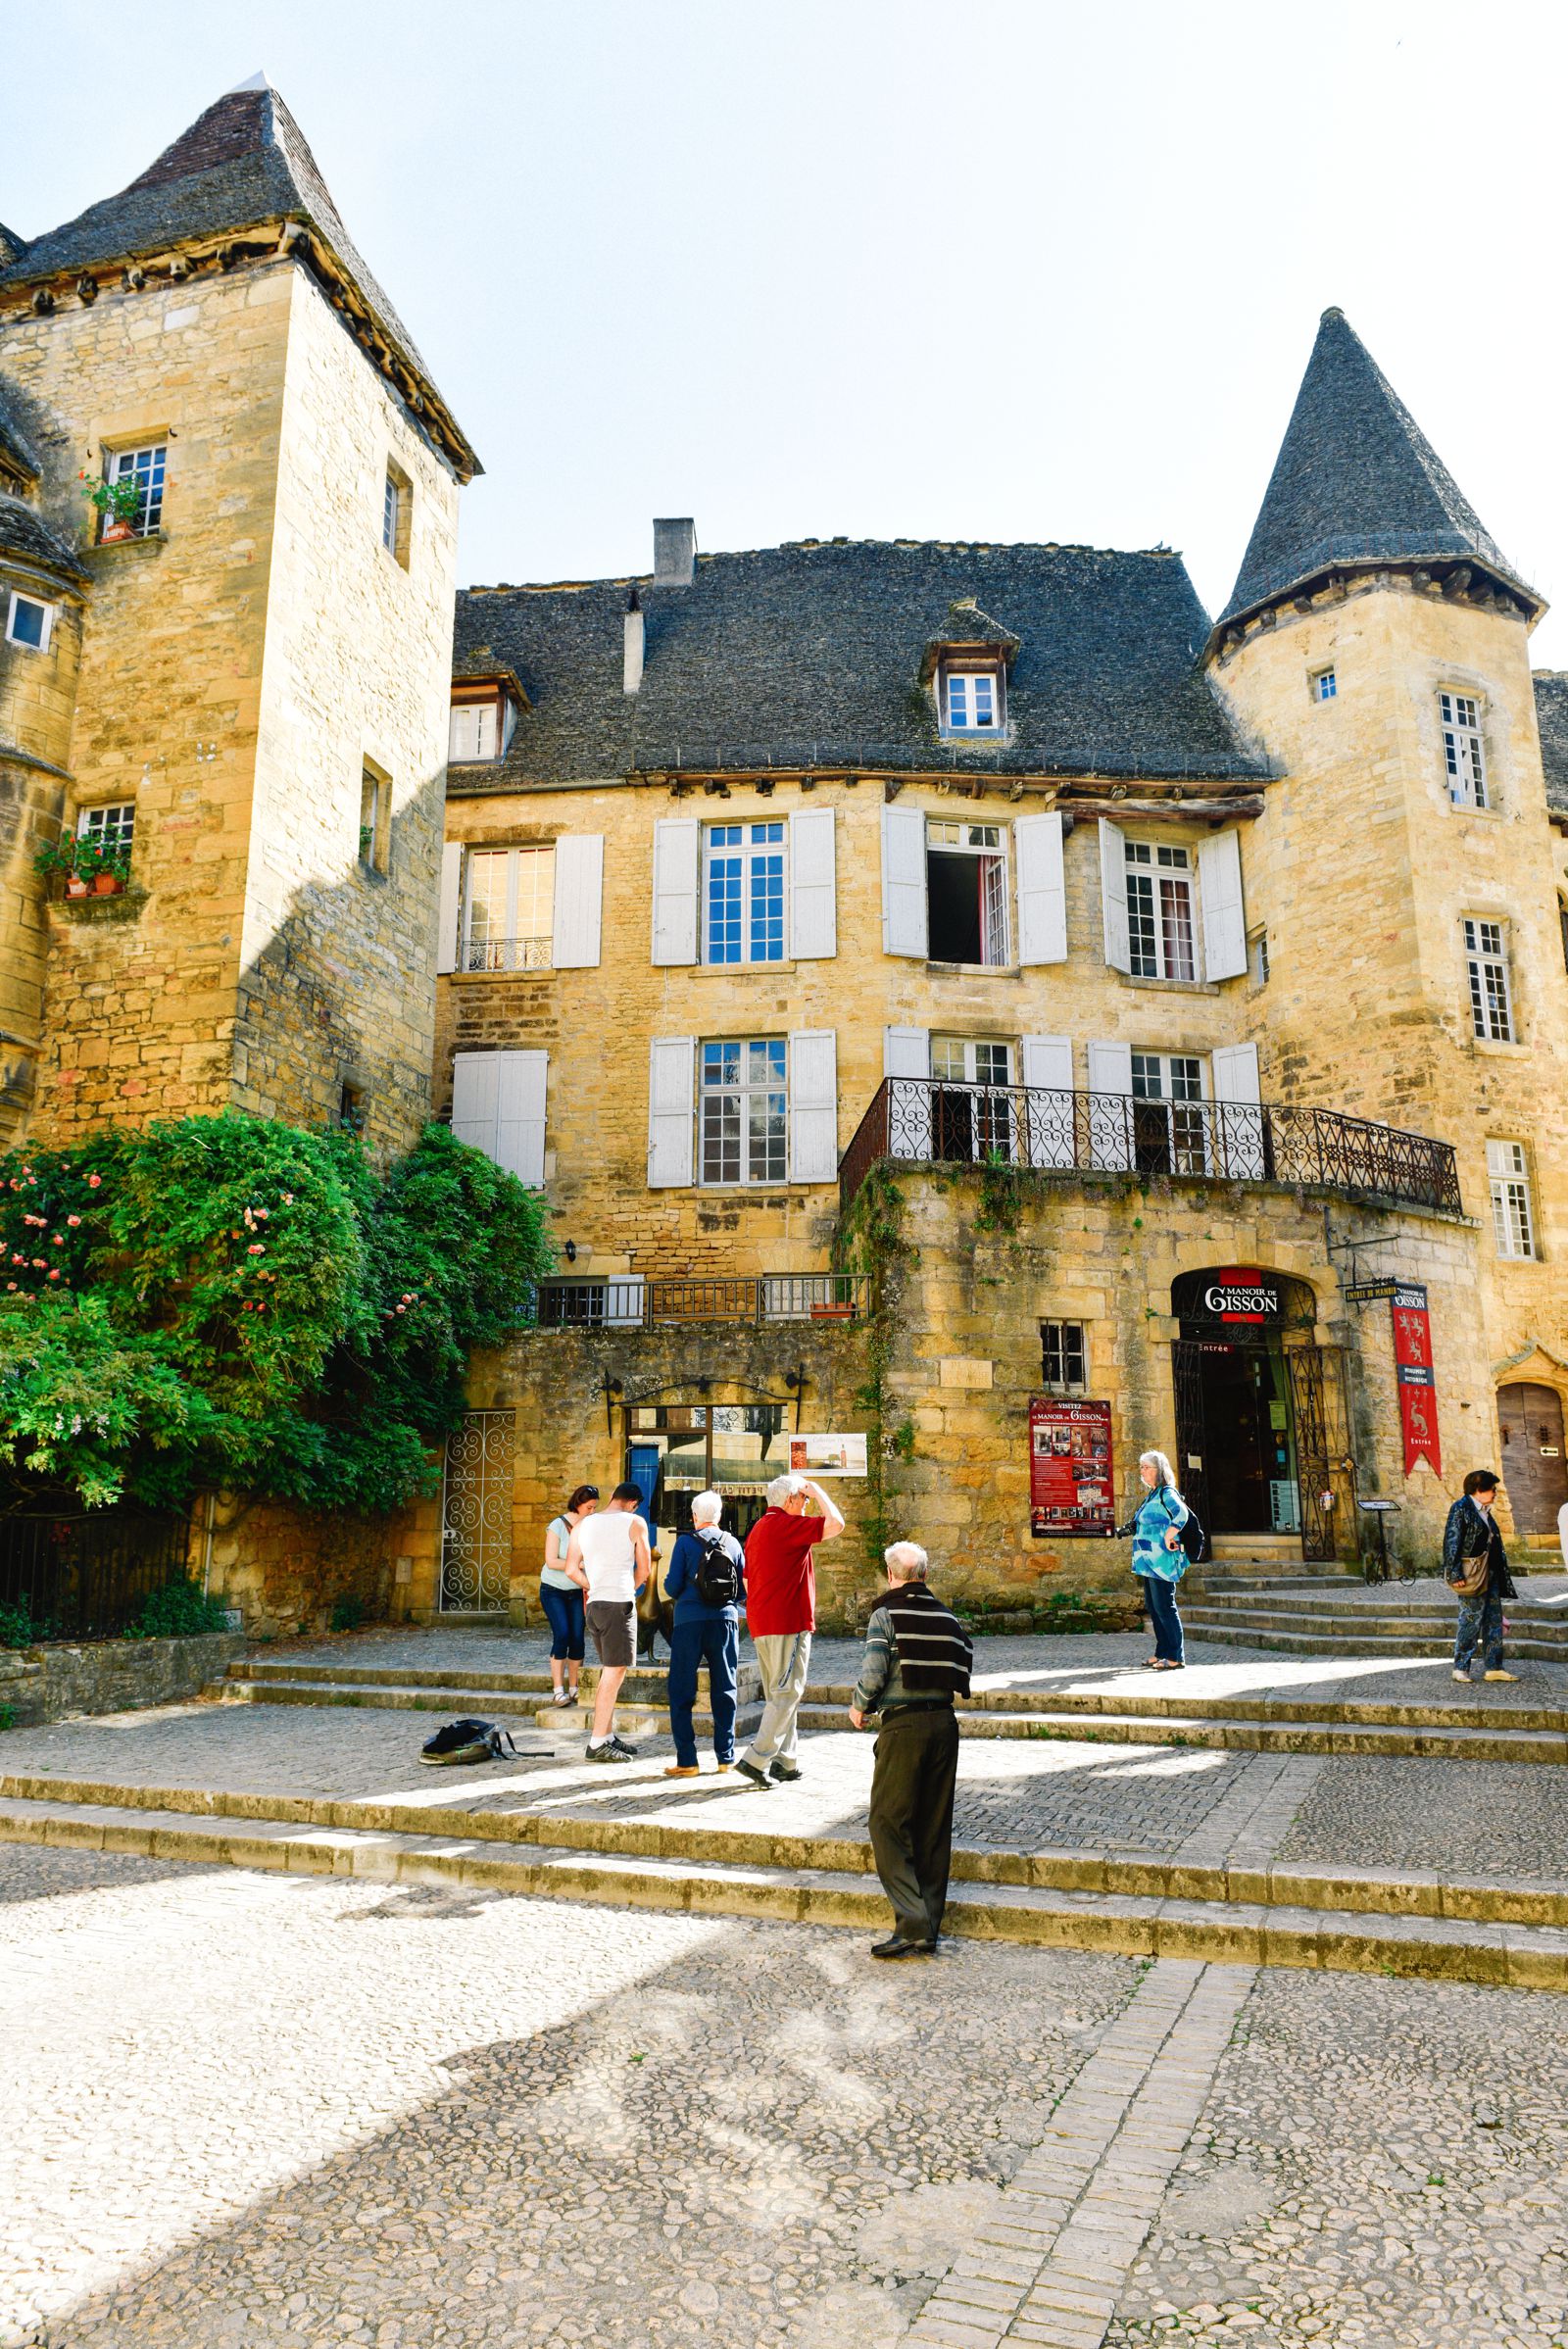 Mornings In The French City Of Sarlat And Afternoons In The Village Of Beaumont-du-Périgord... (9)